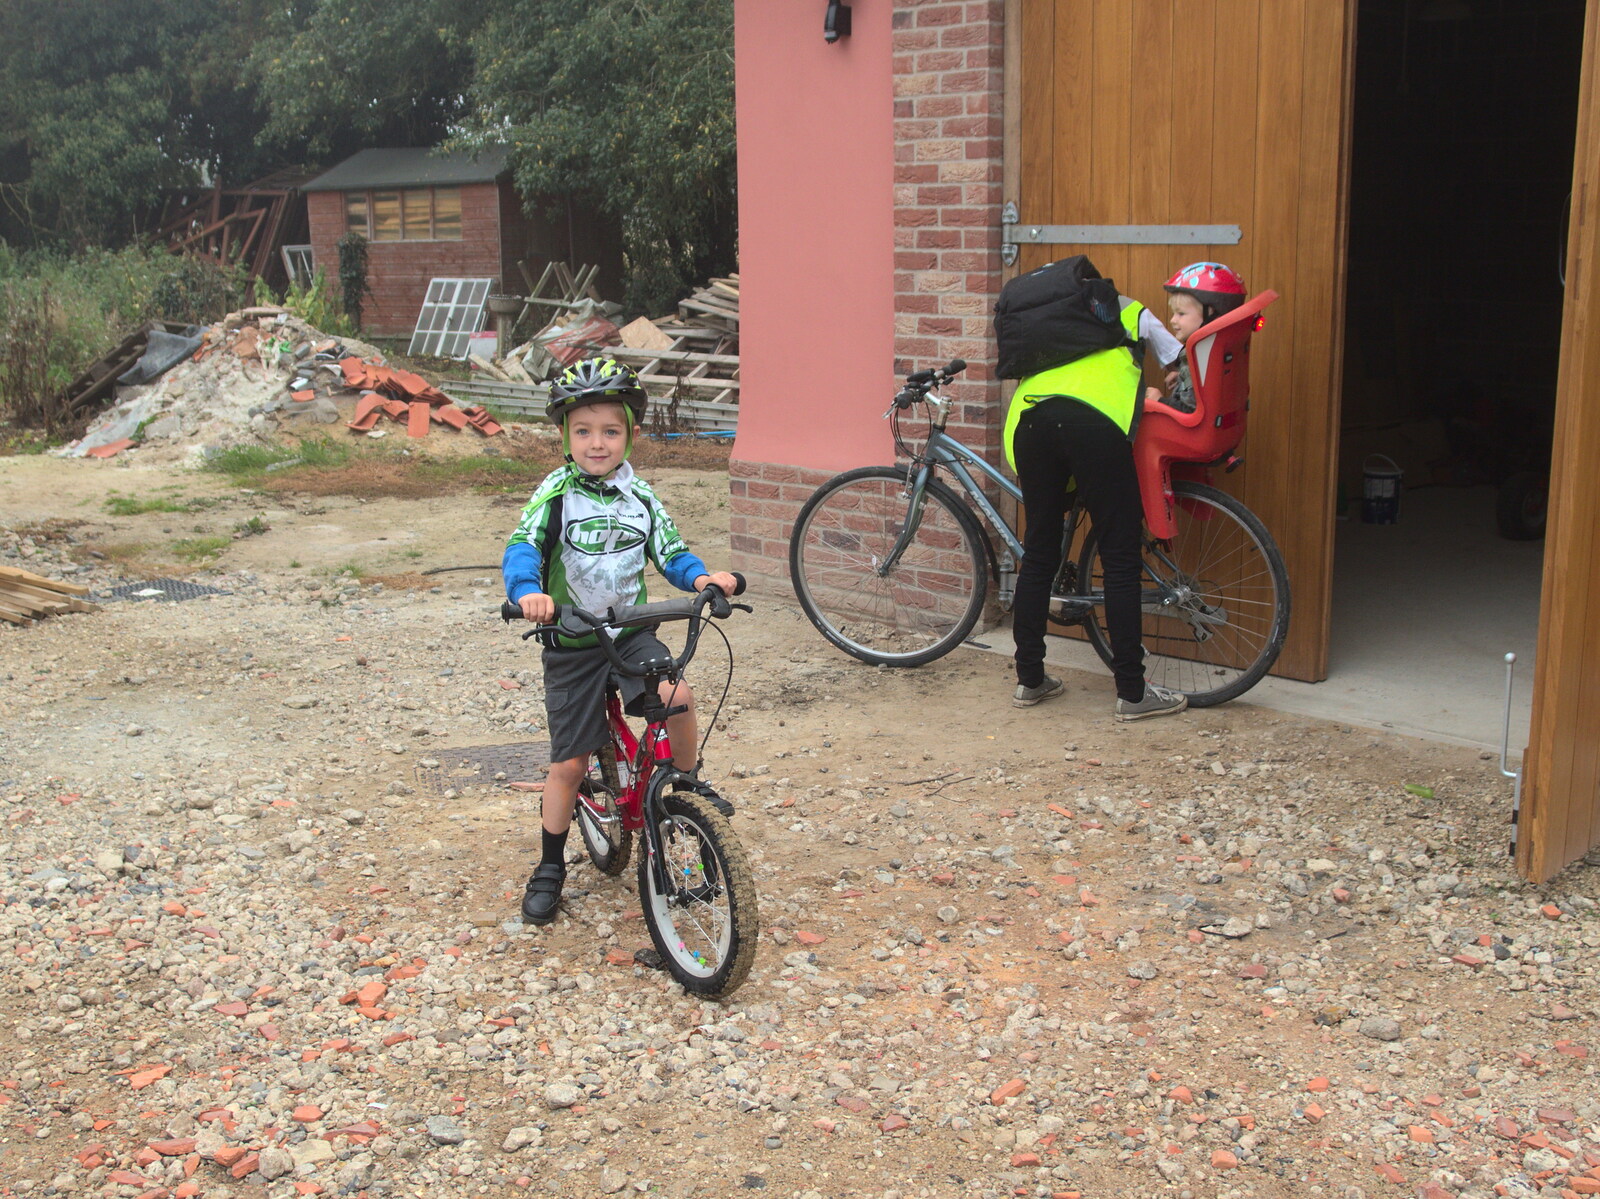 Fred's ready to ride from Bike Rides and the BSCC at the Railway, Mellis and Brome, Suffolk - 18th September 2014